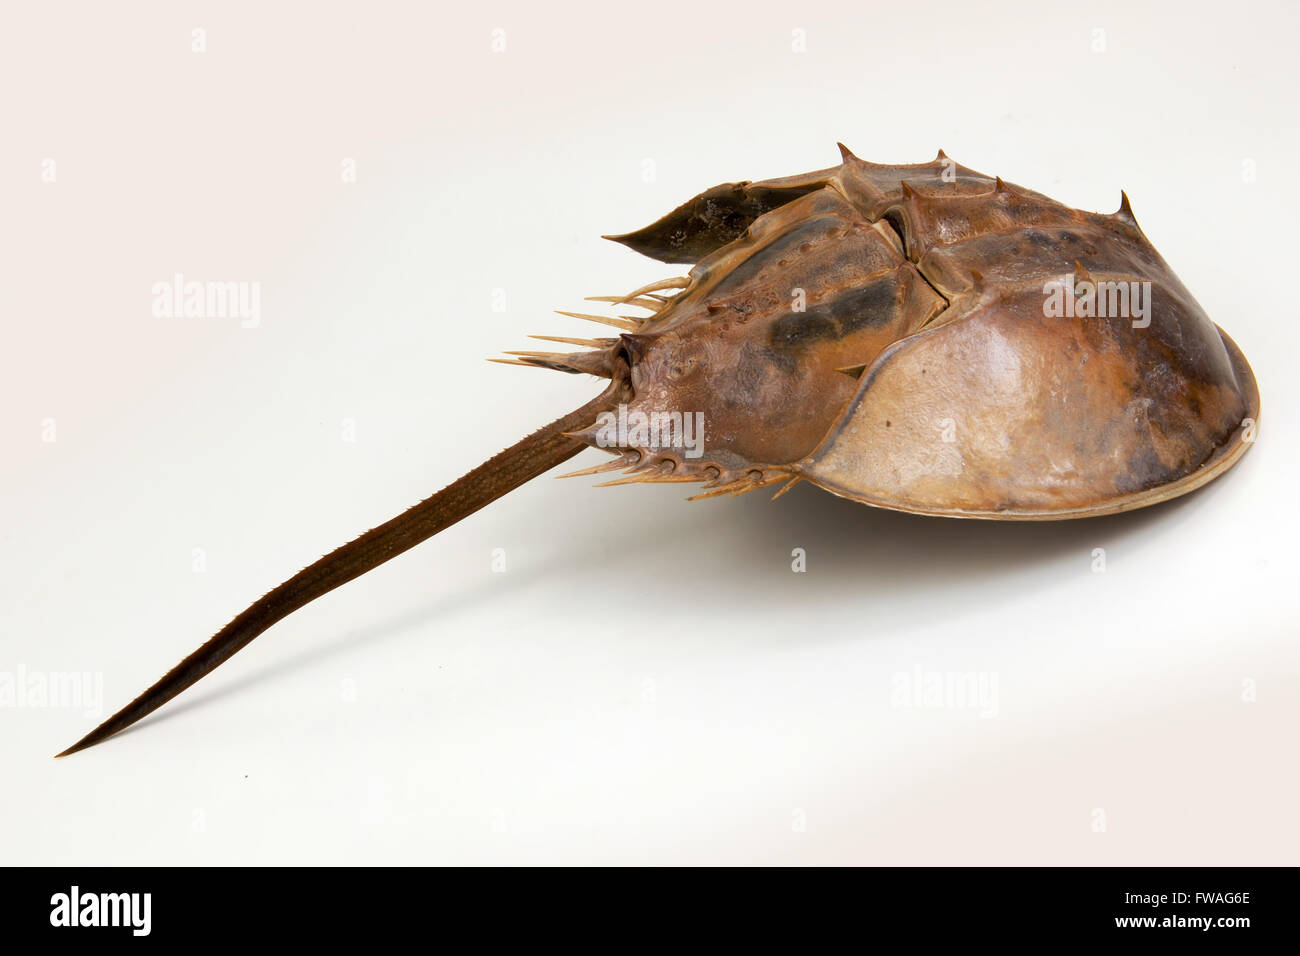 a large marine arthropod with a domed horseshoe-shaped shell, a long tail-spine, and ten legs. on isolated. Stock Photo